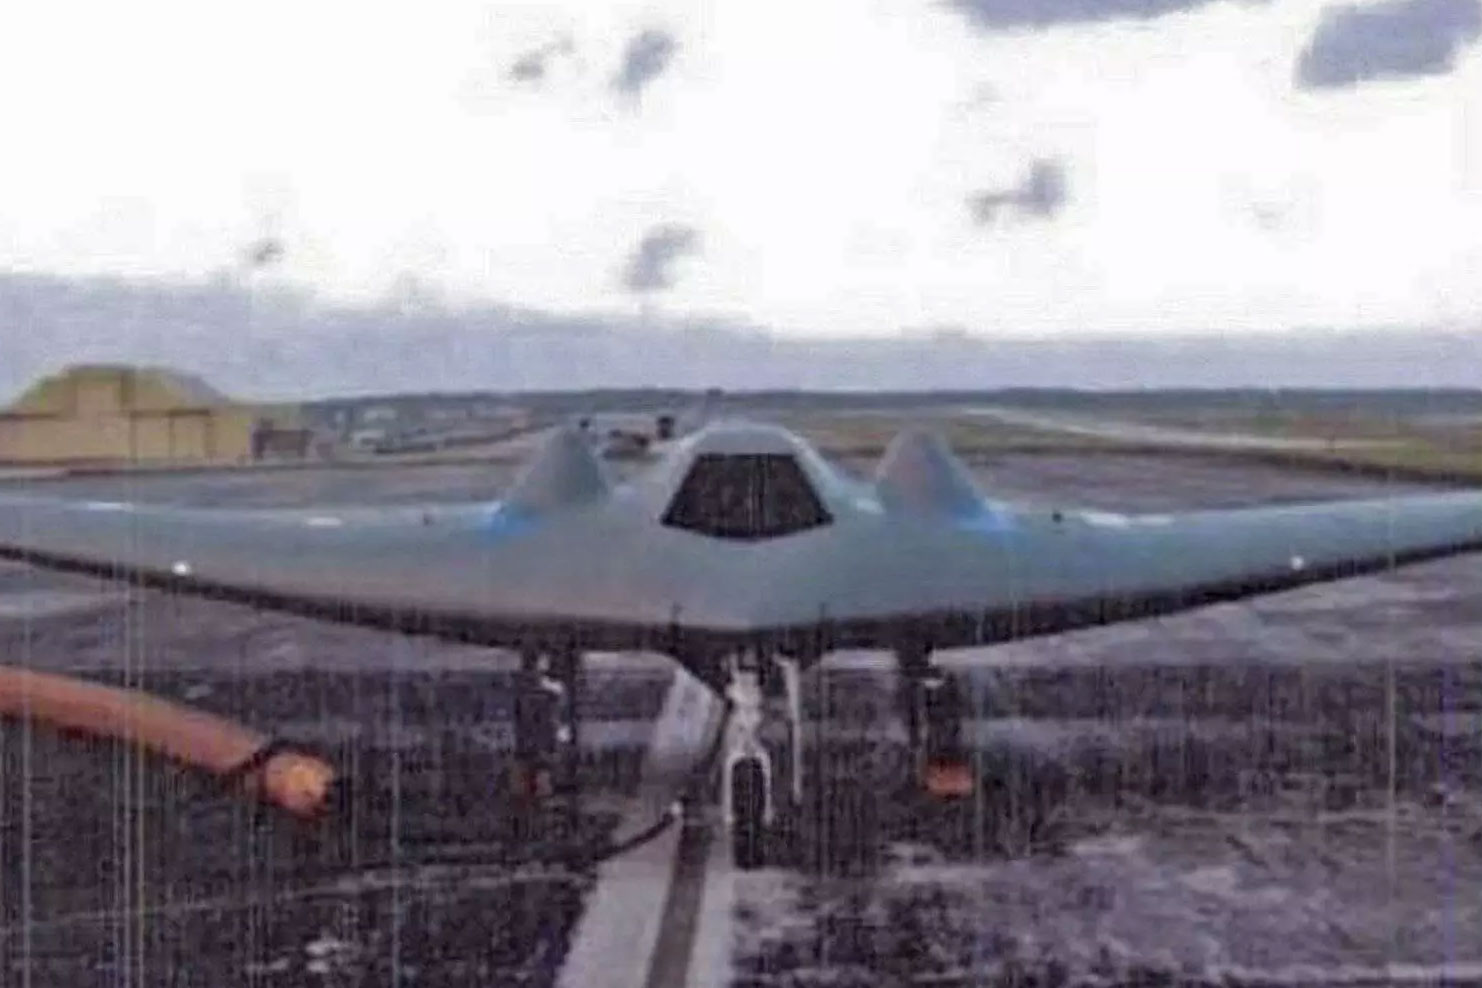 Front view of the US RQ-170 Sentinel at Anderson Air Force Base